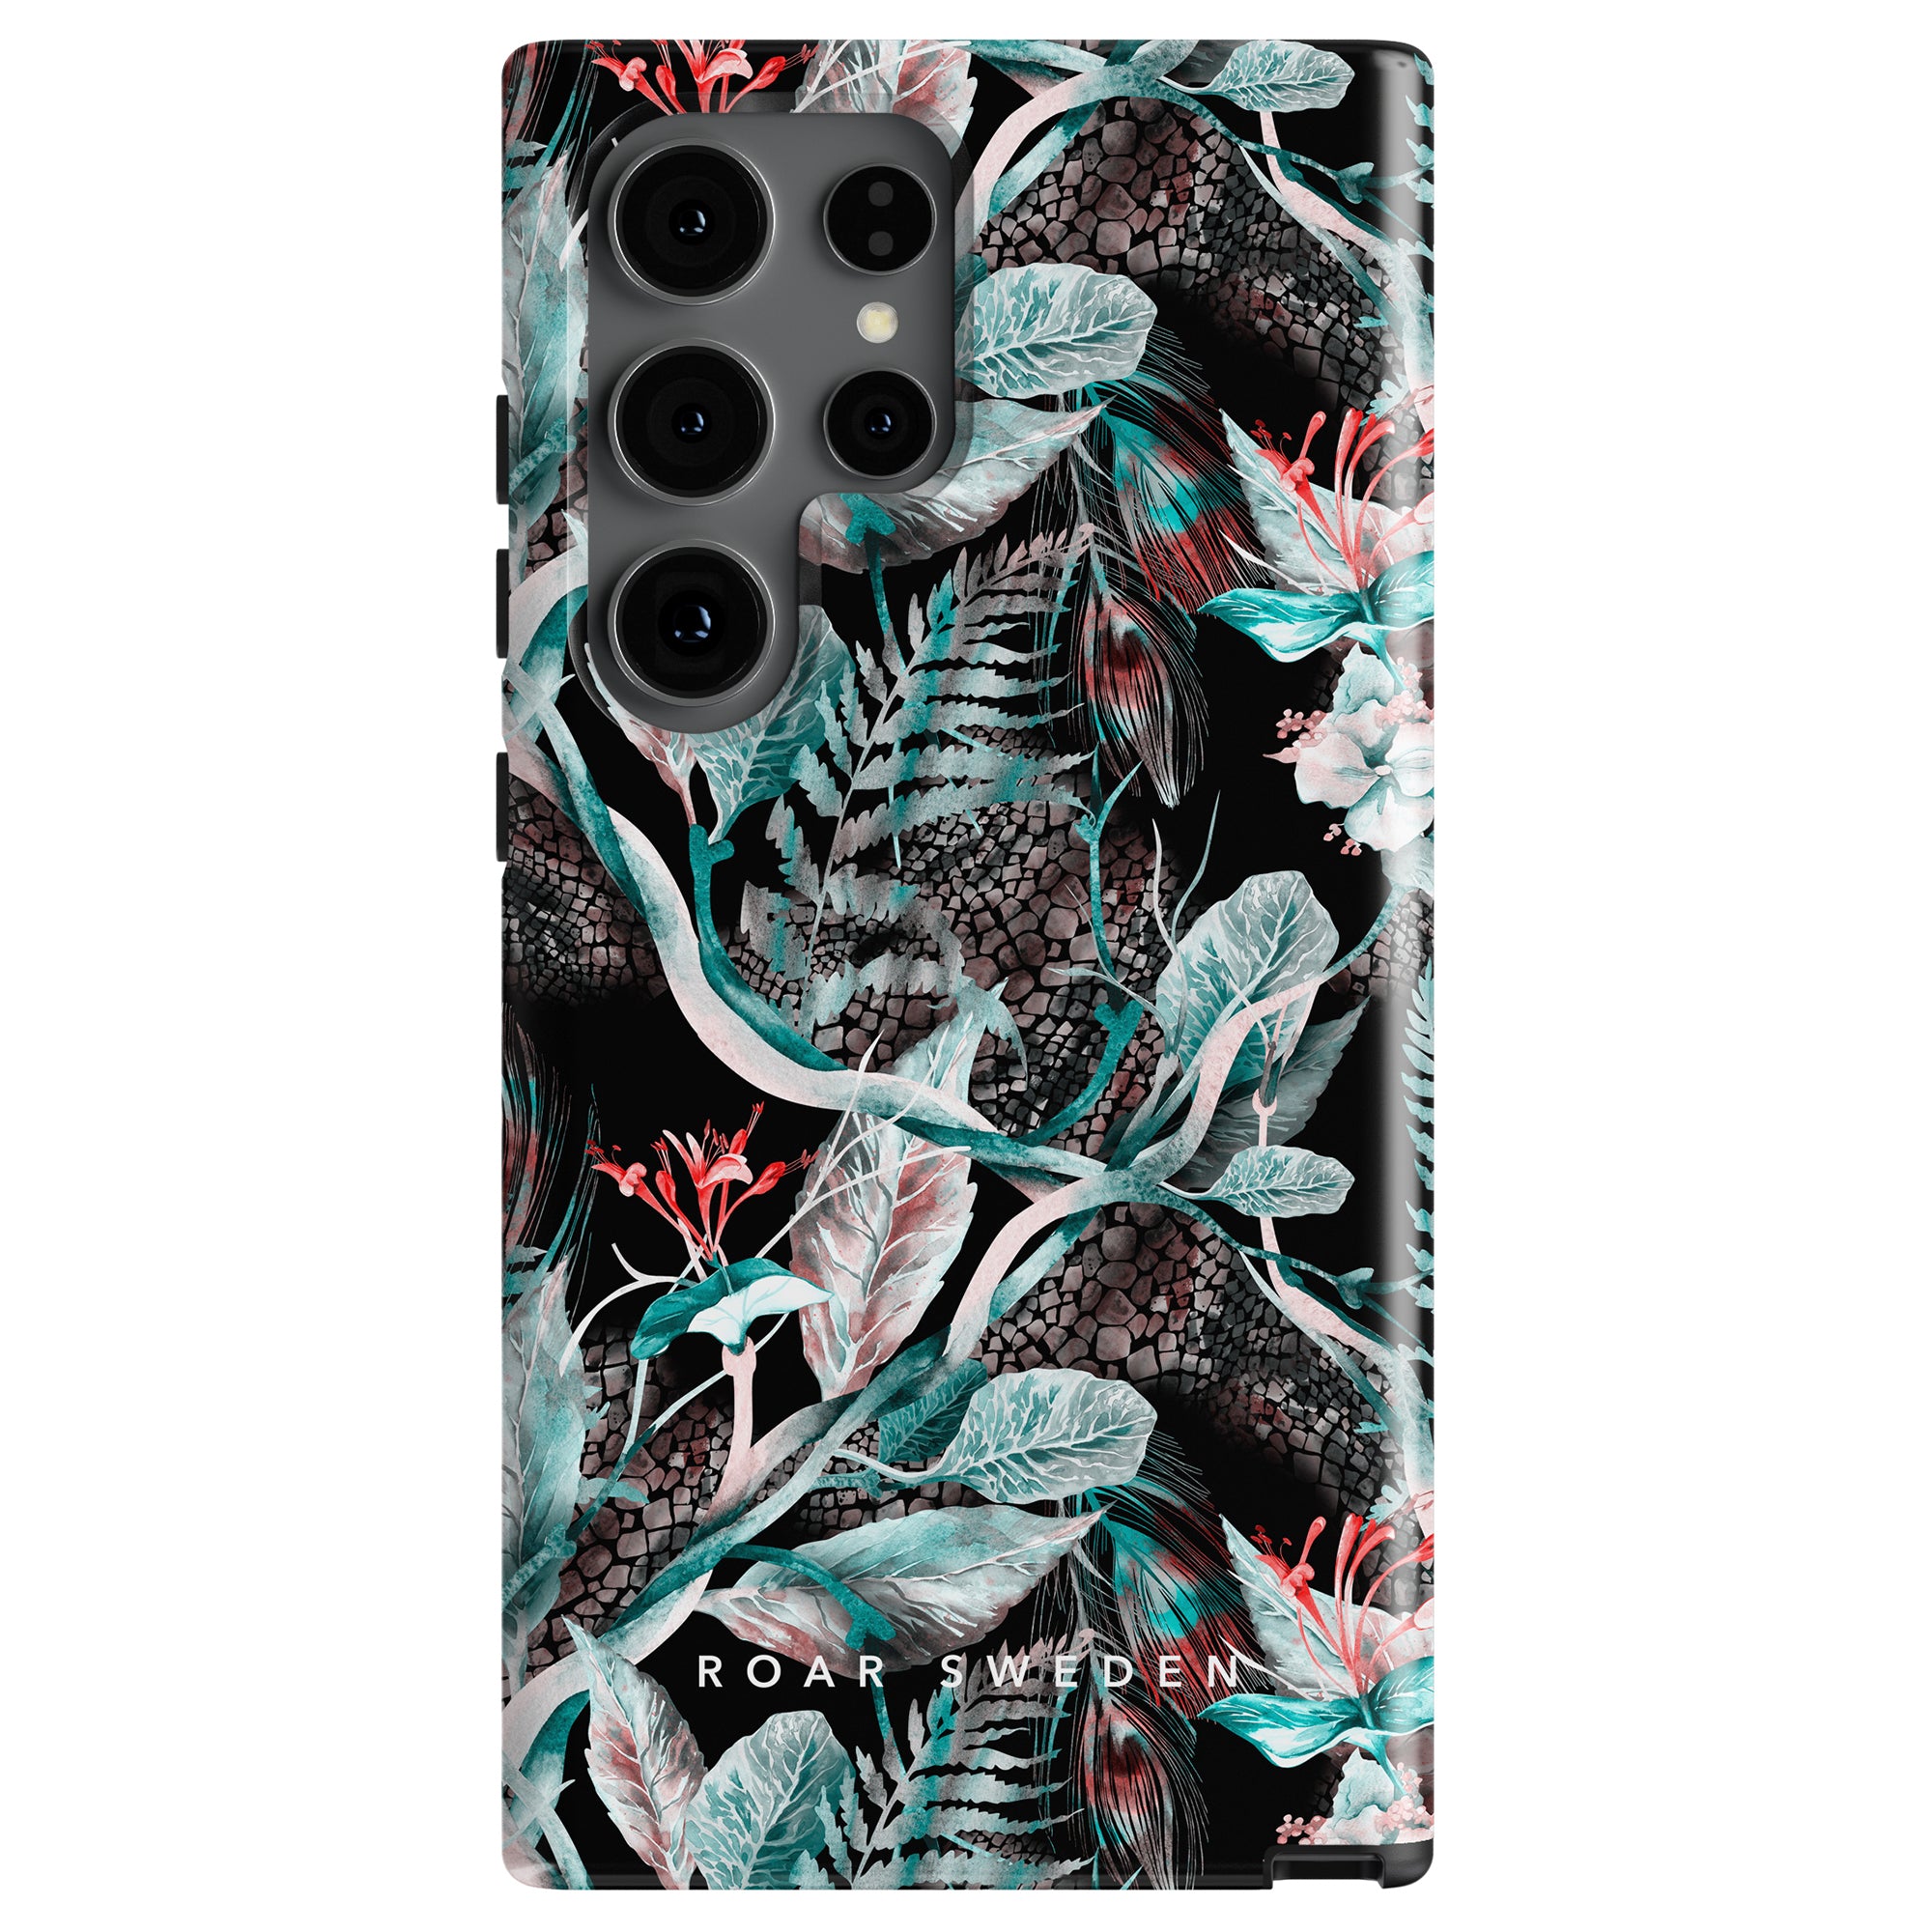 A smartphone cover with a tropical leaf and floral design on a black background. The text "ROAR SWEDEN" is printed at the bottom, giving it an exotic Snake Jungle - Tough case feel.